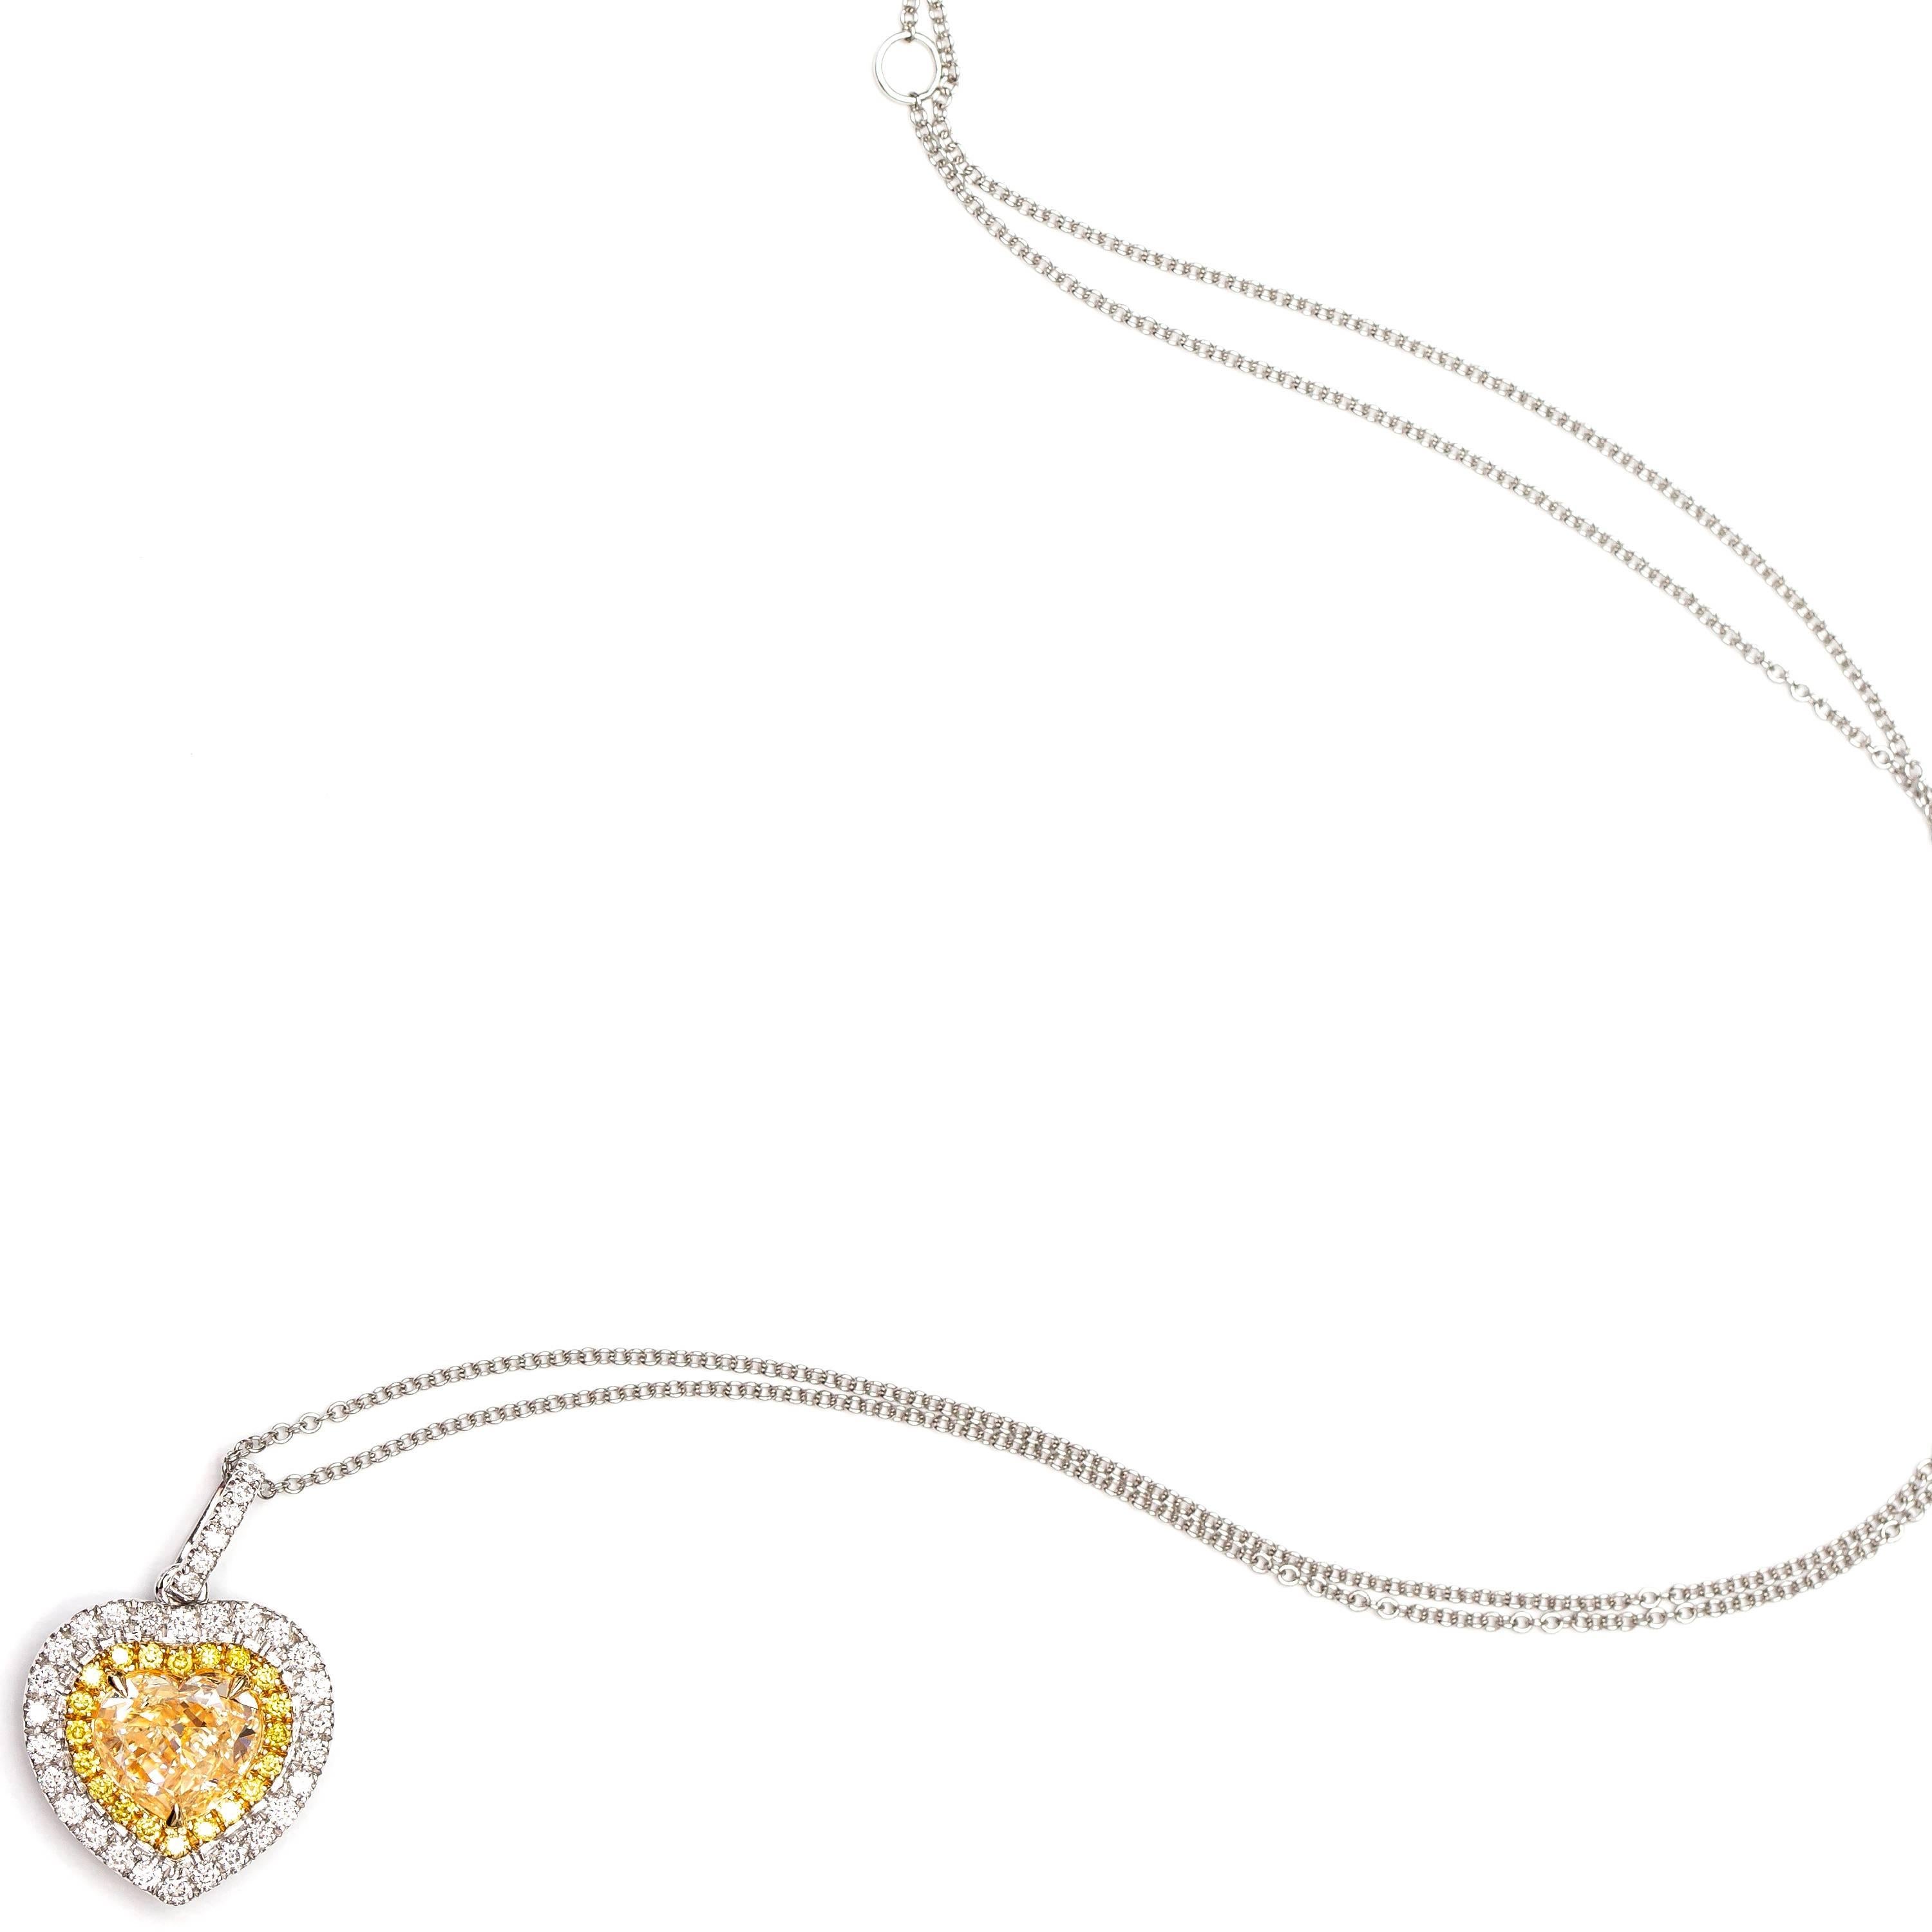 A Gorgeous 1.44 Carat Yellow Heart Shaped claw set Pendant. Heart Surrounded by a double halo of beautiful contrasting Yellow and White Brilliant Round Diamonds weighing a total of 0.26 Carat. Set in 18 Karat White Gold. A beautiful pendant that can